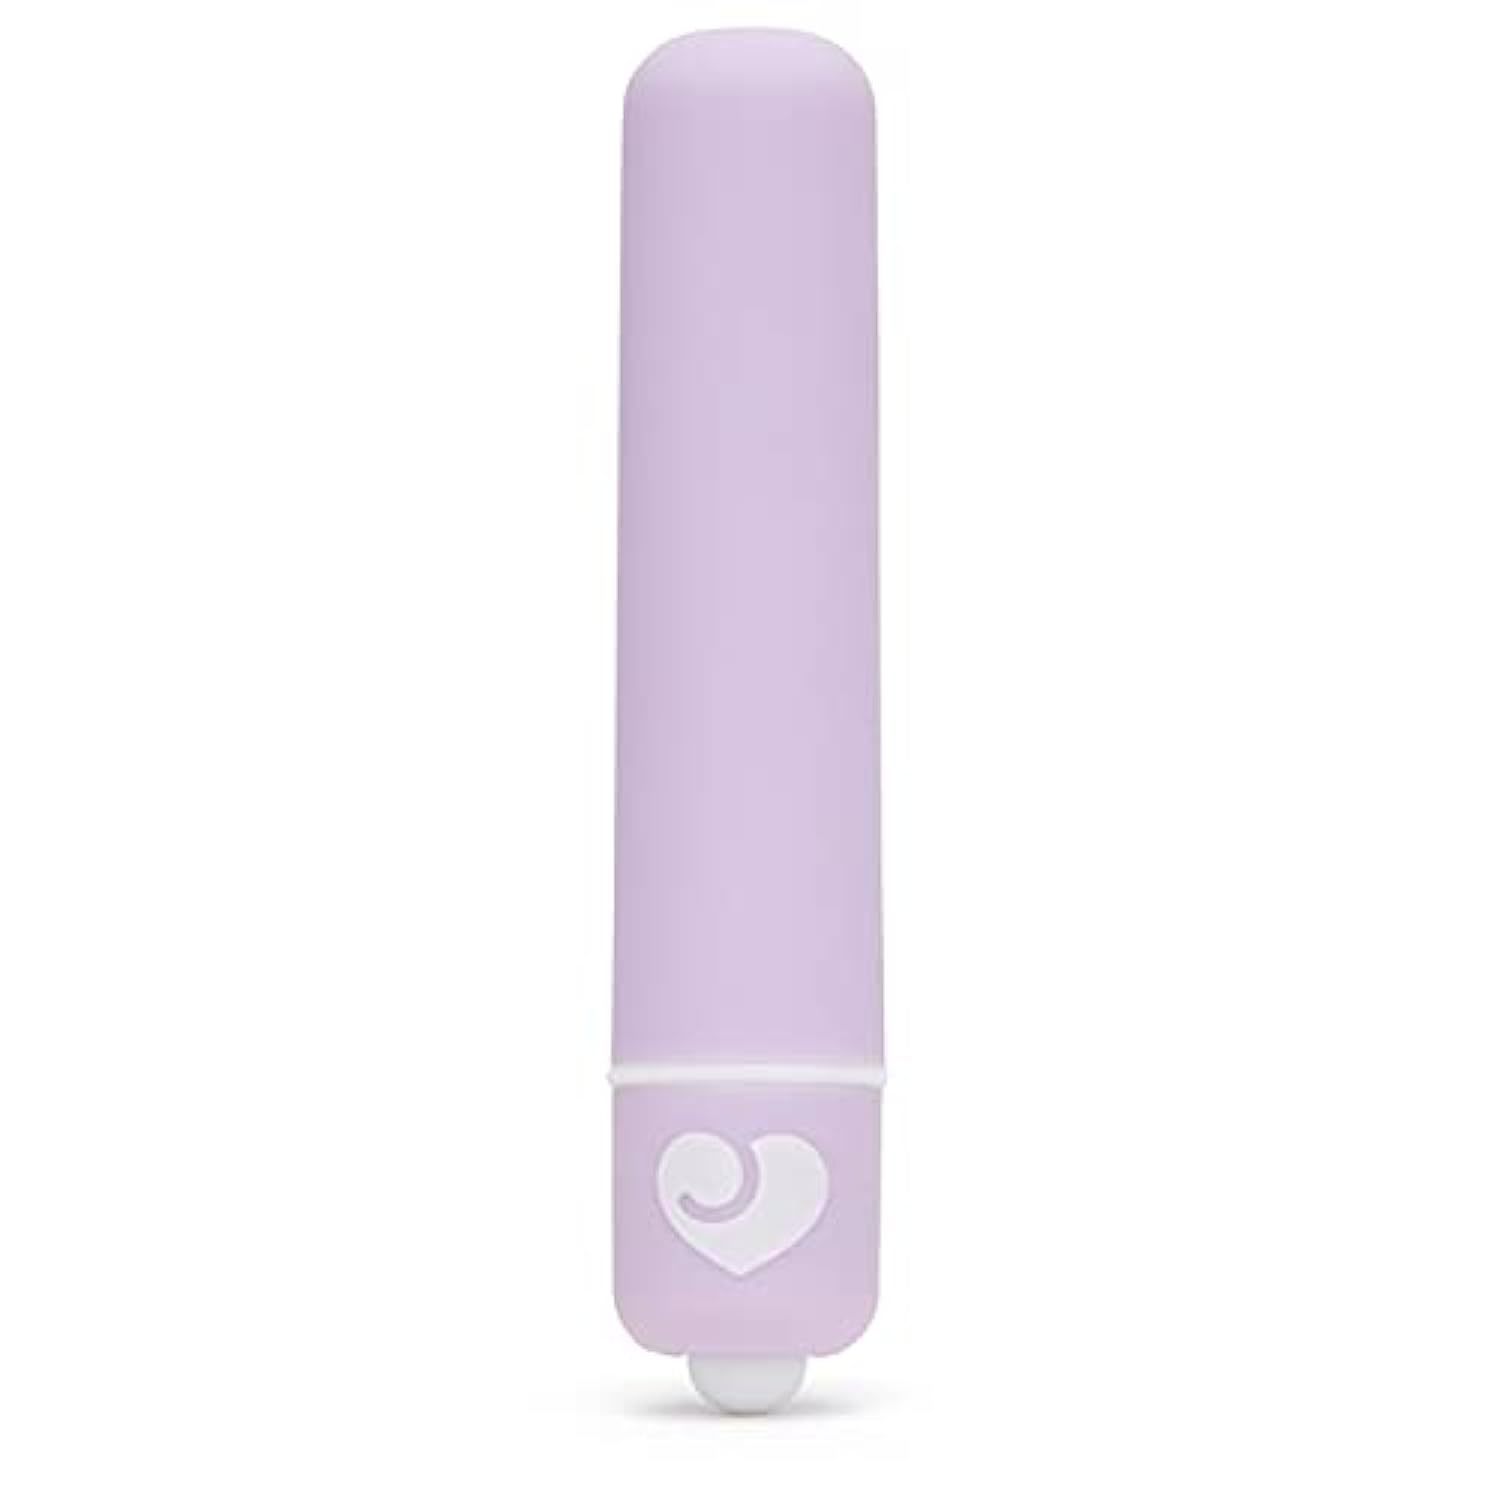 Primary image for Thrill Bullet Vibrator - 3 Inch Lightweight & Compact Mini Bullet Vibrator - 10 